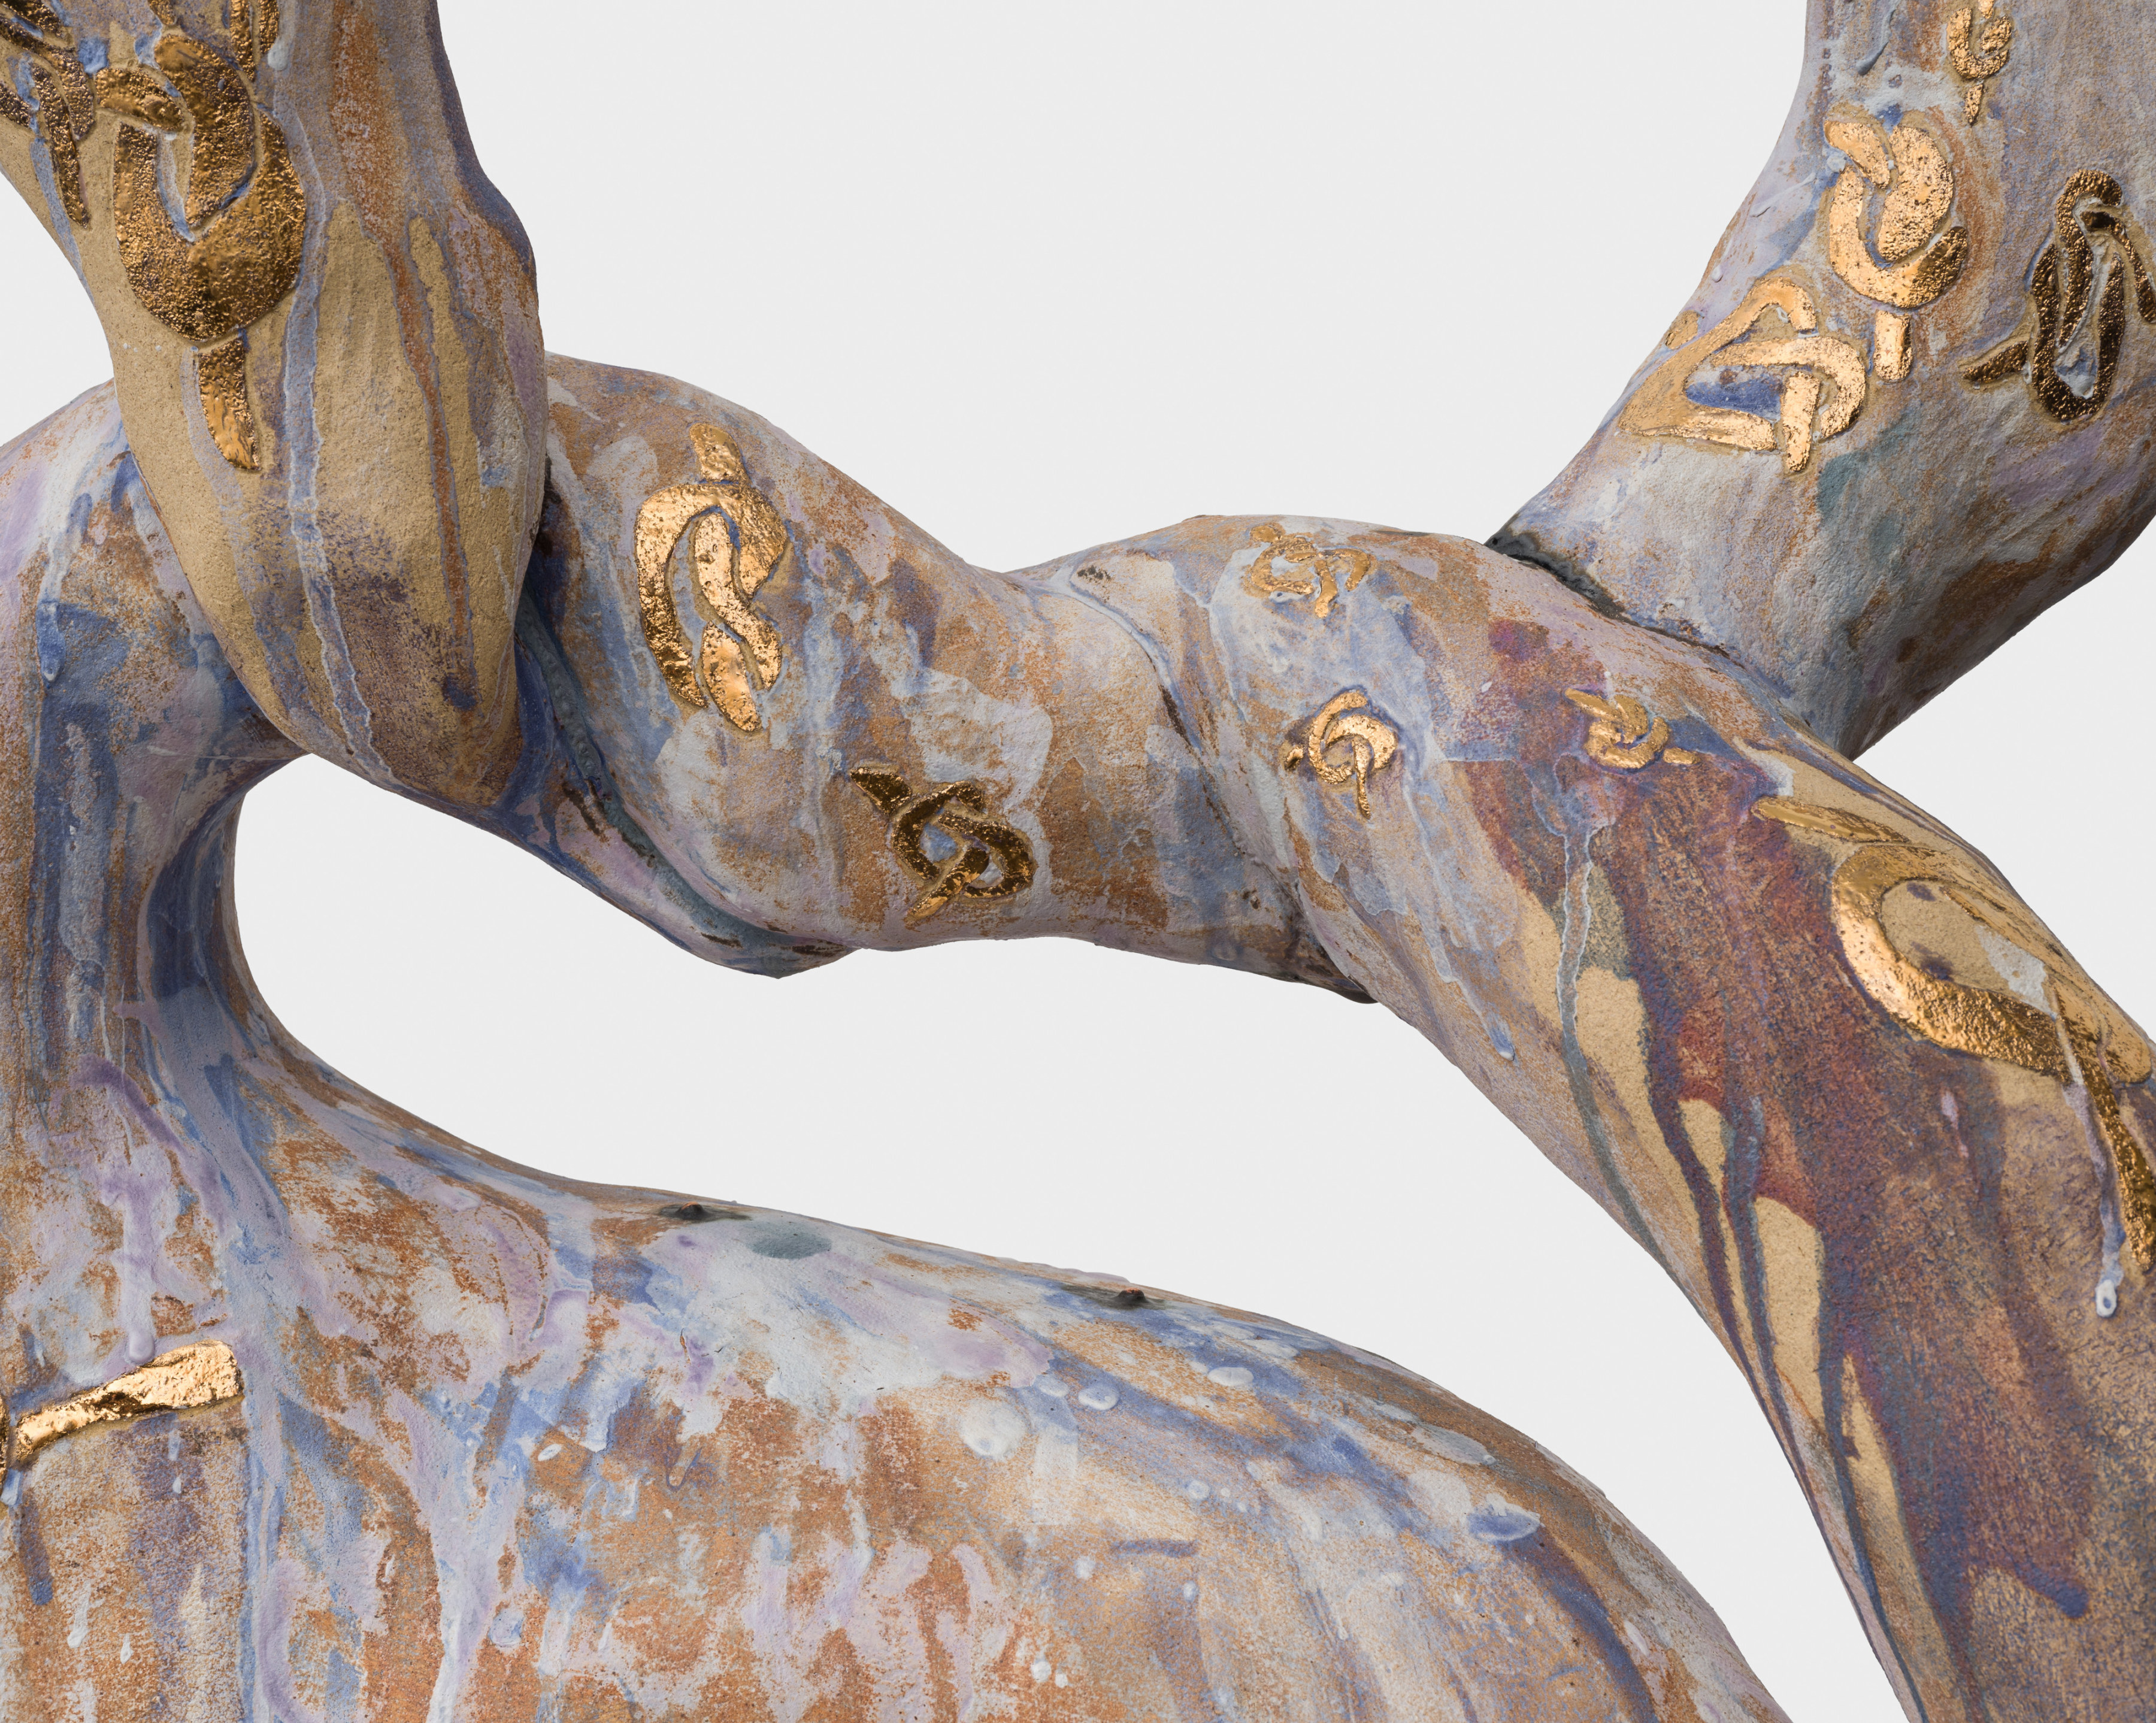 Detail of "Knot with Knots" depicting golden painted knots on the knotted part of the sculpture. 